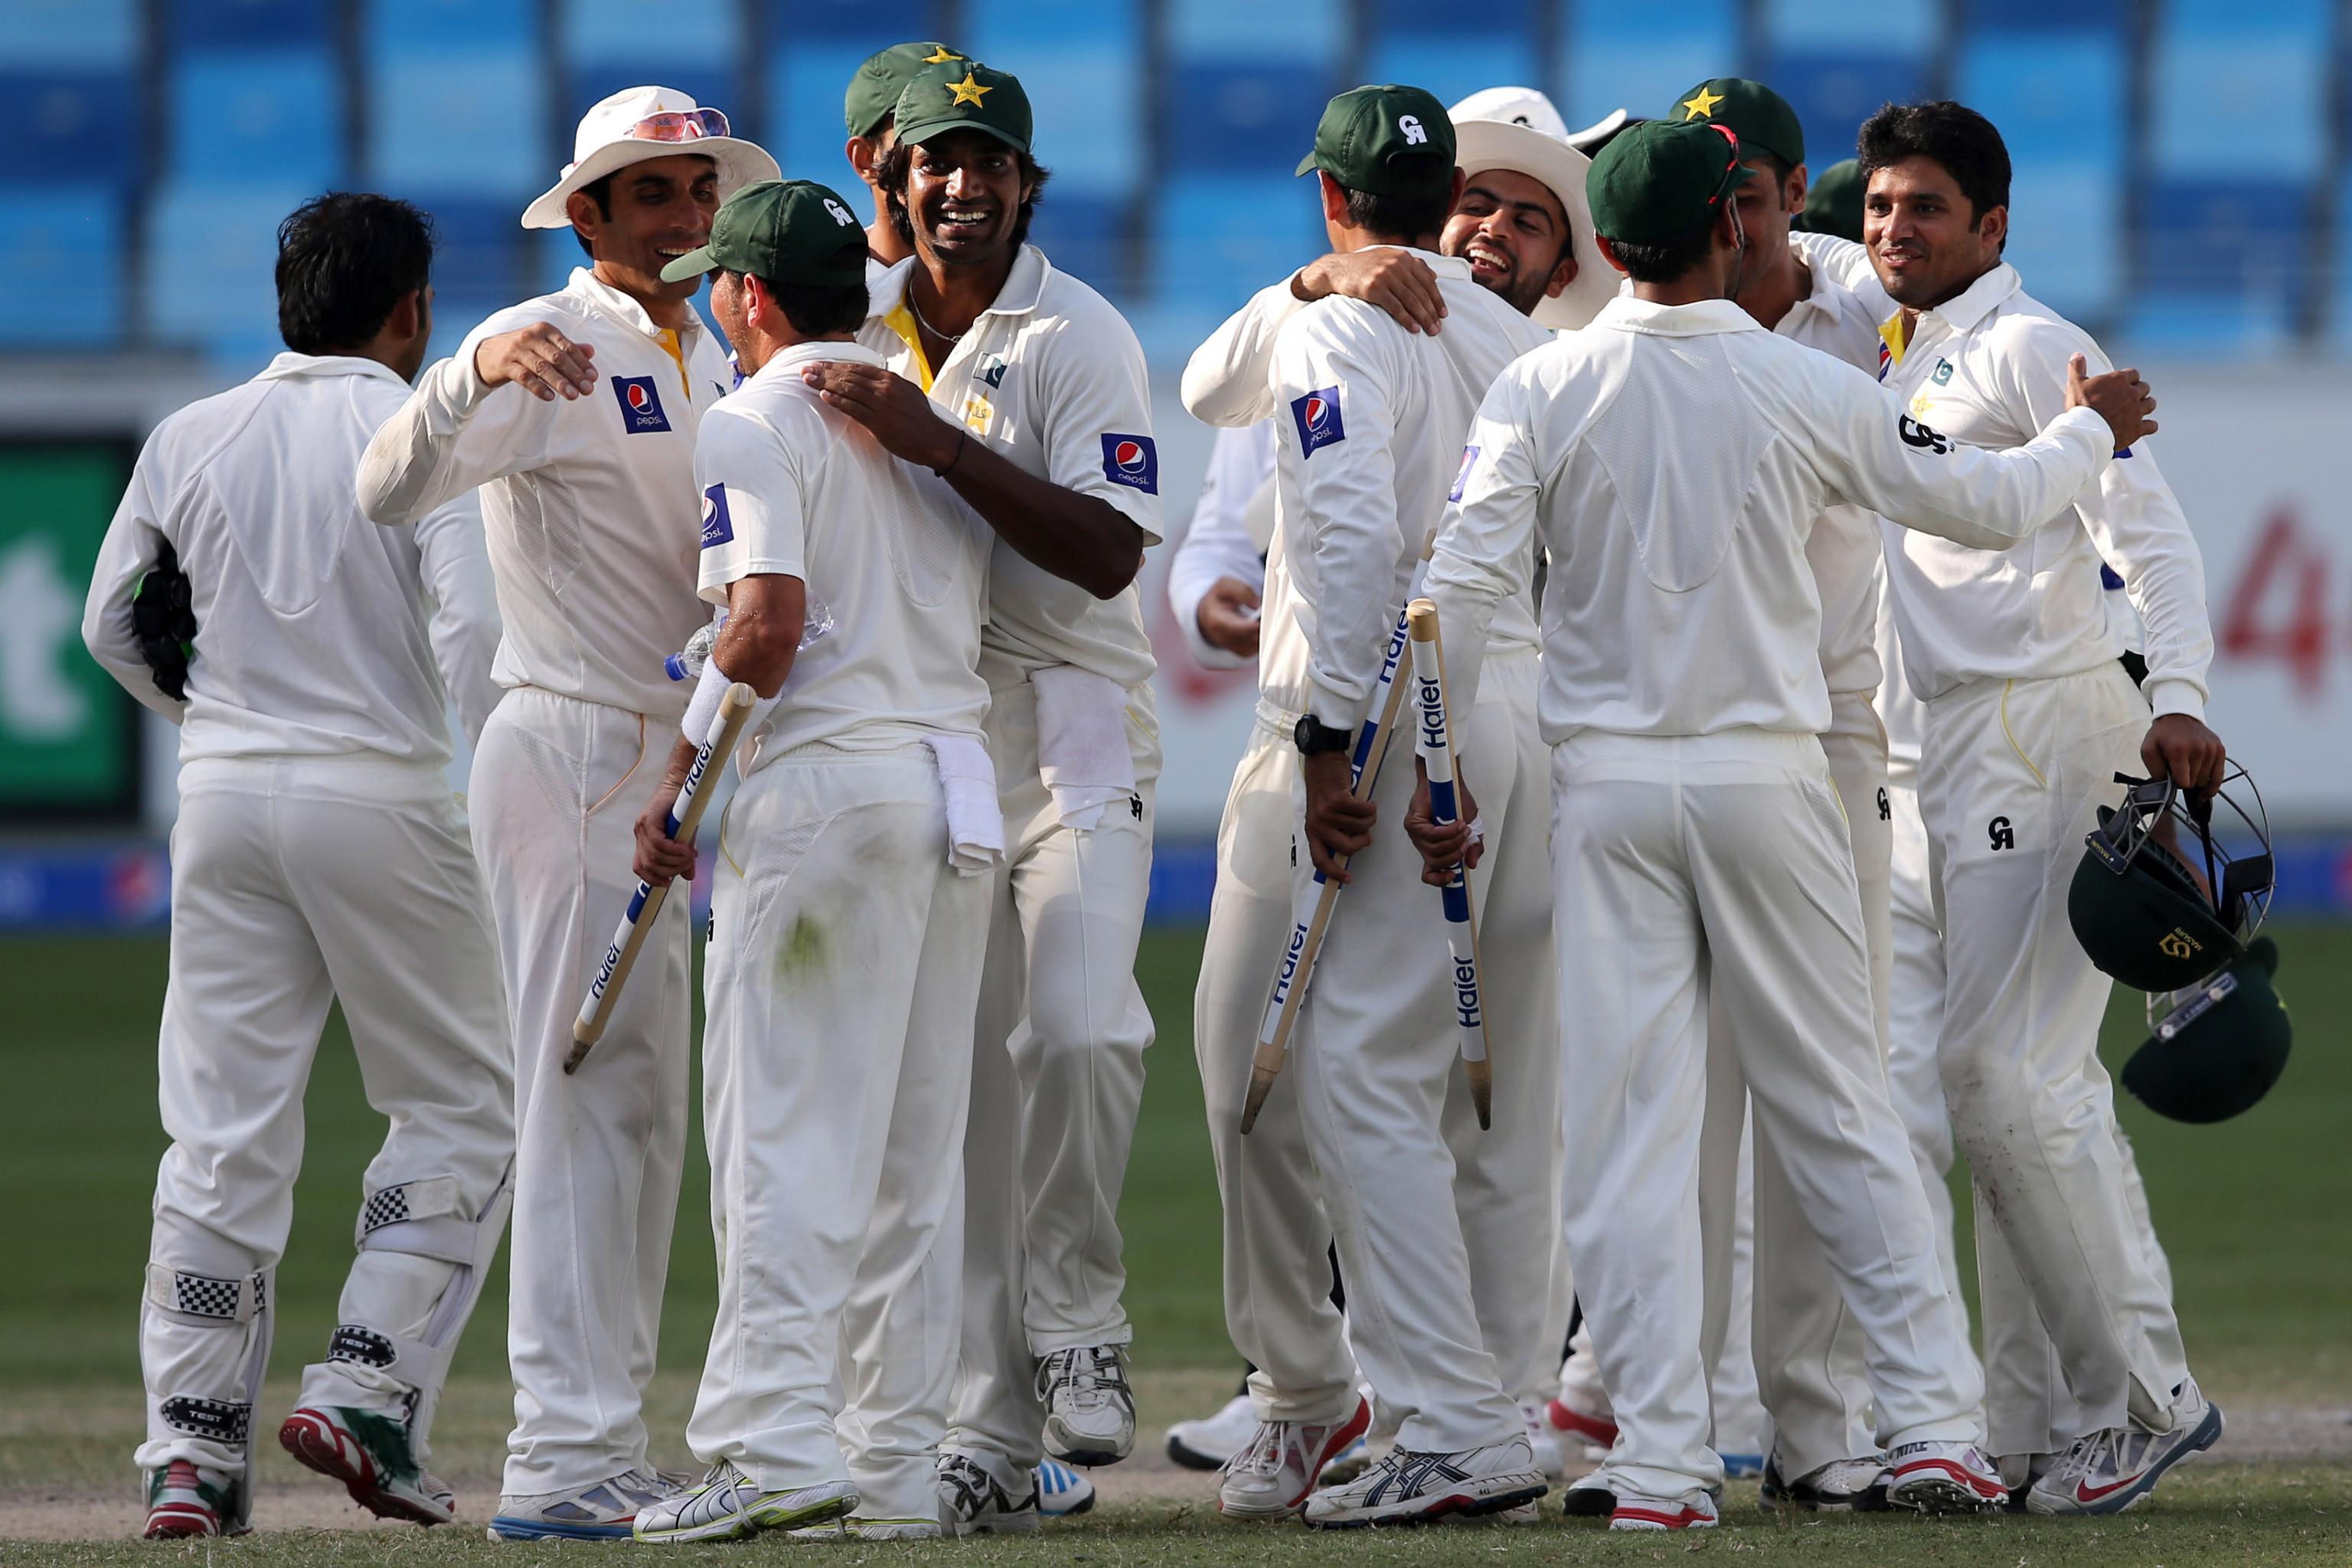 Australia vs. Pakistan, 1st Test, Day 5: Highlights, Scorecard and Report, News, Scores, Highlights, Stats, and Rumors